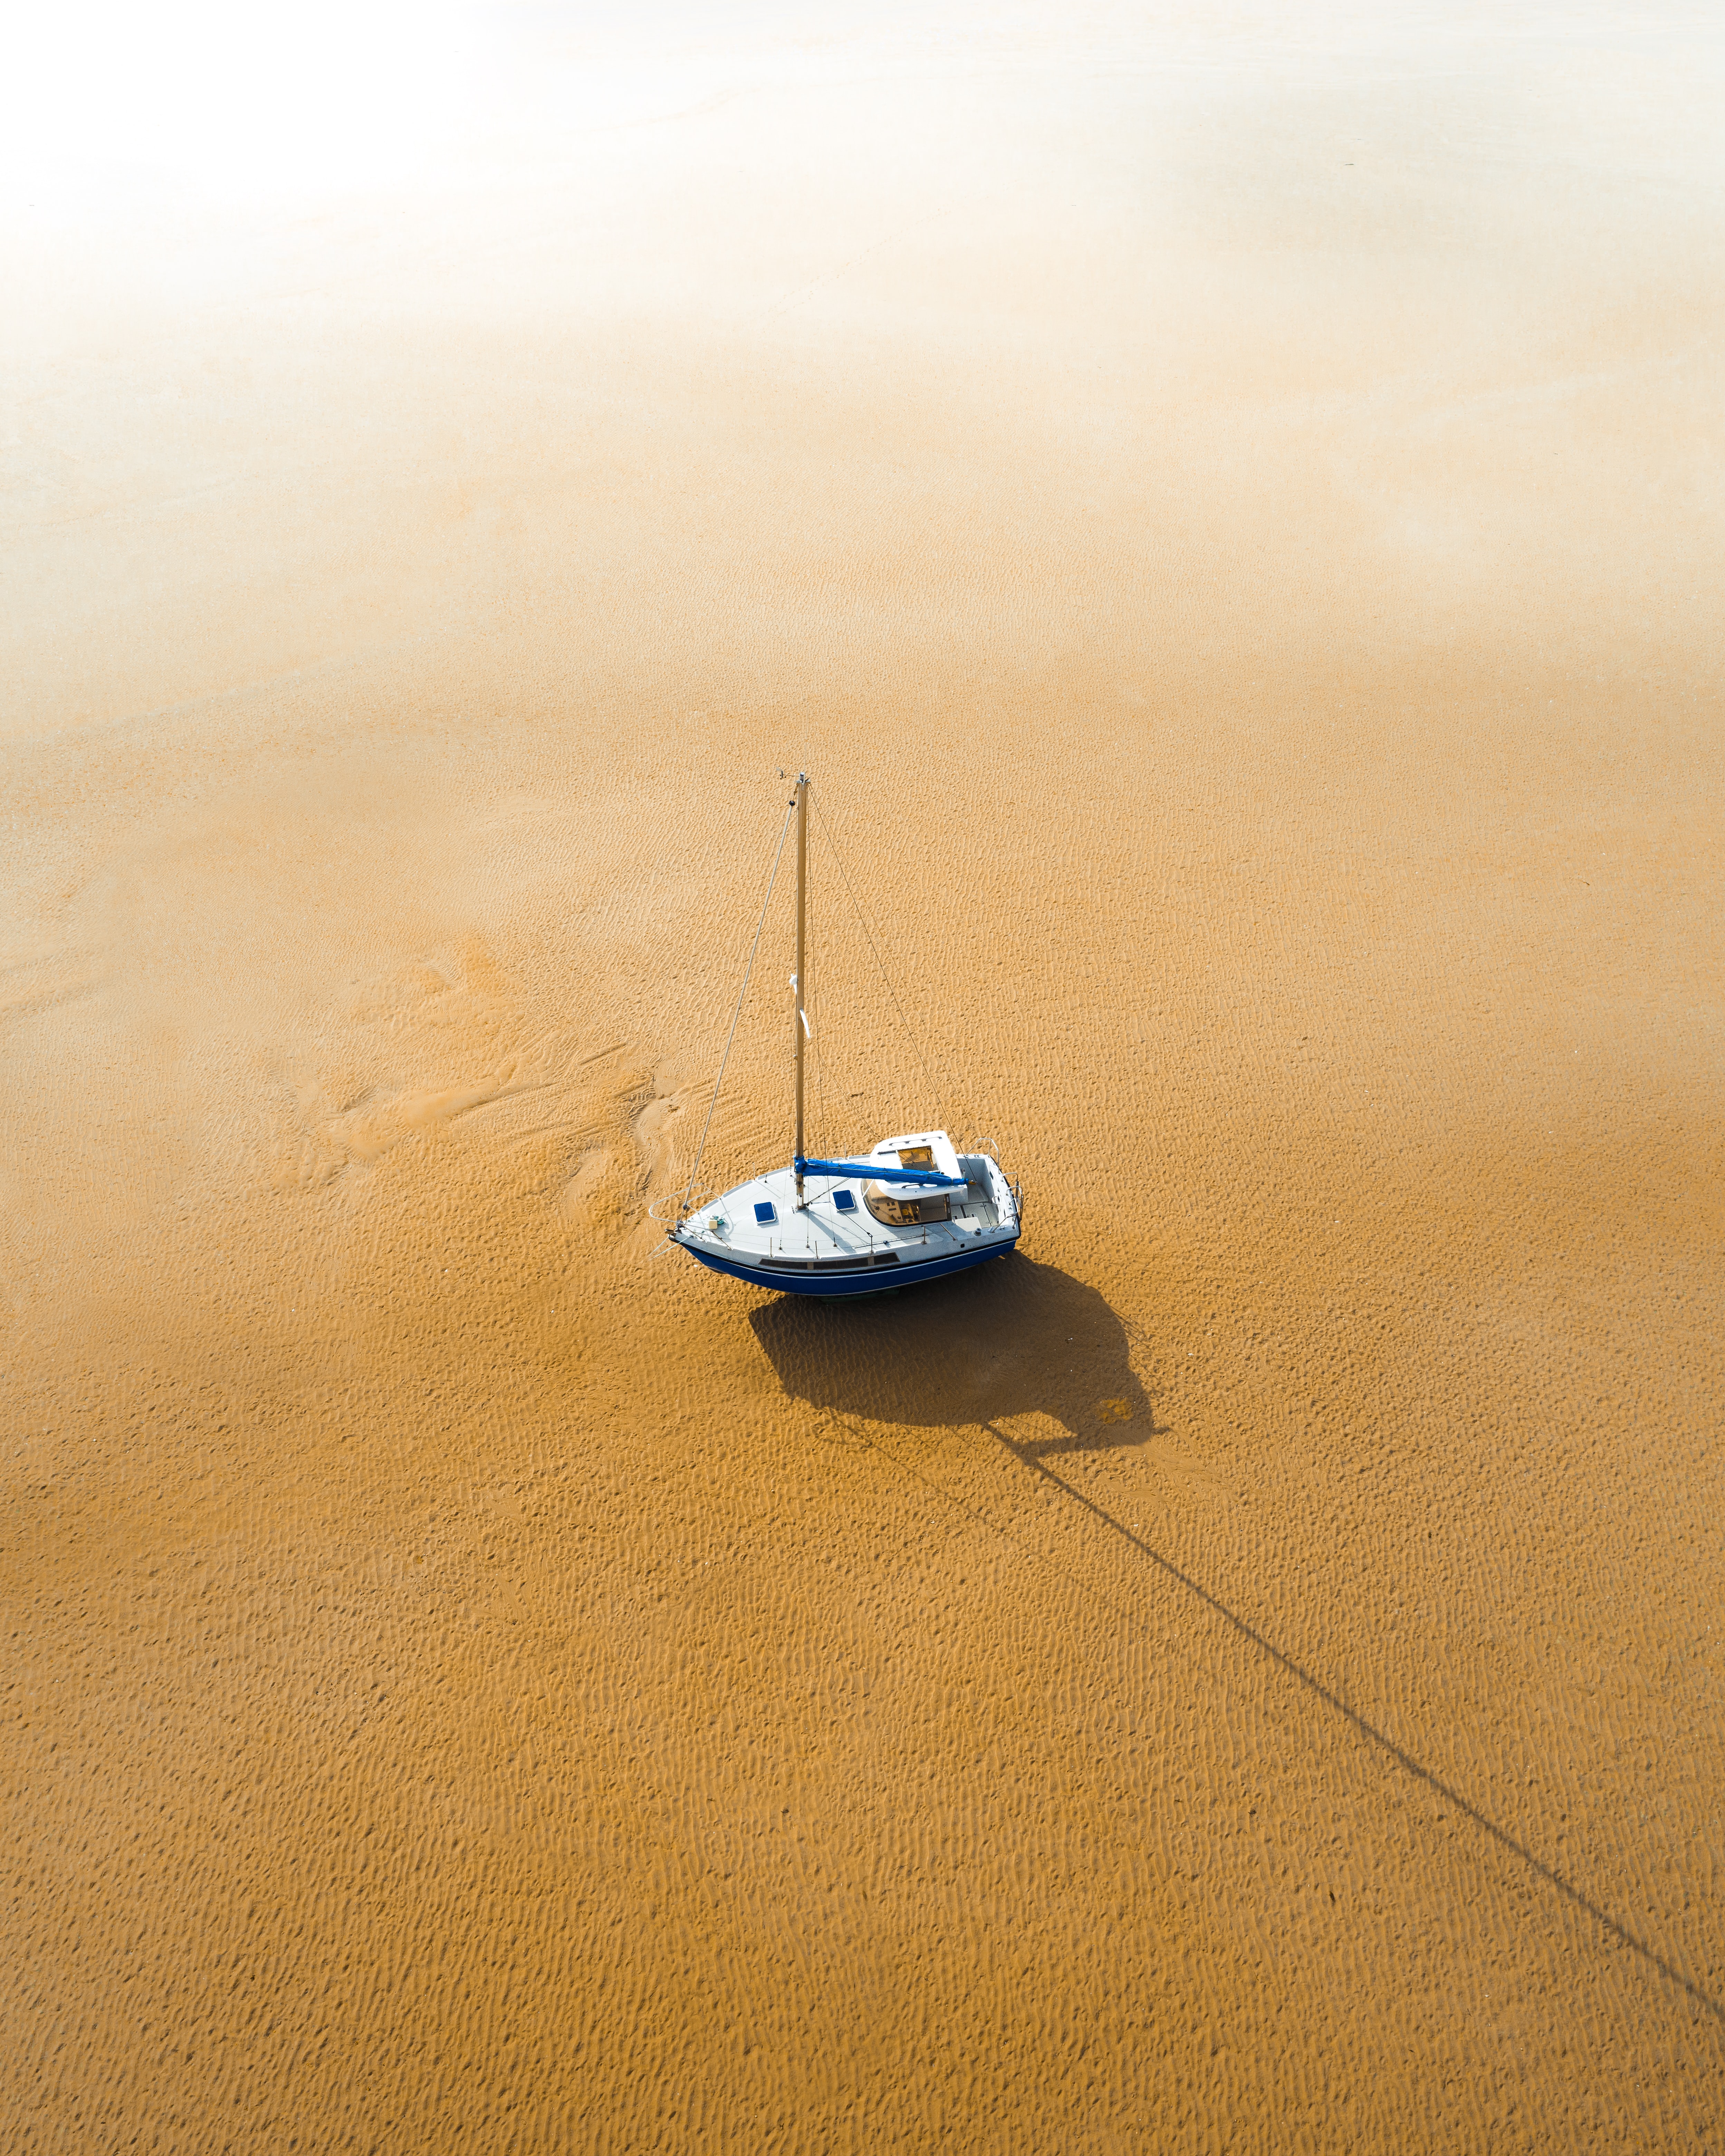 sailboat, sand, view from above, miscellanea, miscellaneous, boat, sailfish wallpaper for mobile